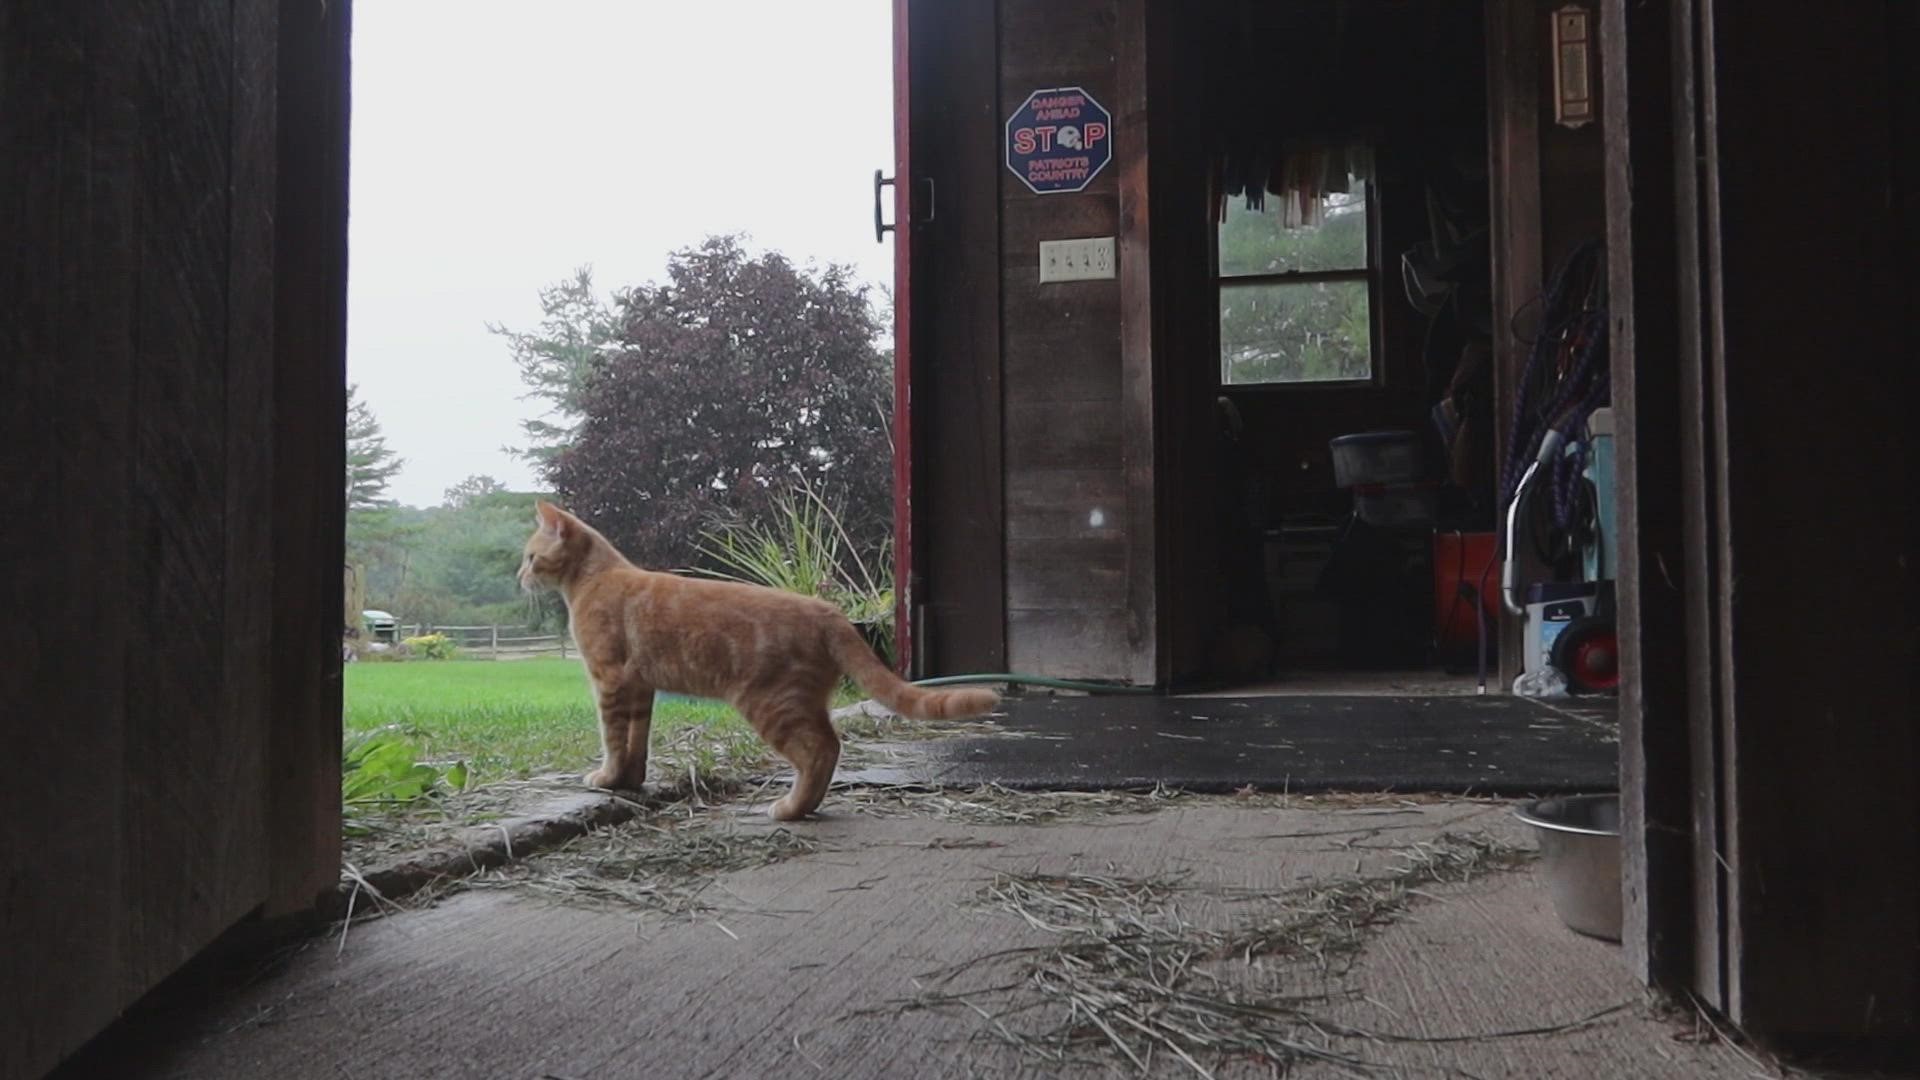 NEWS CENTER Maine’s Griffin Stockford takes us to Bowdoinham, where a young barn cat named Paddy faced his first day of fall.